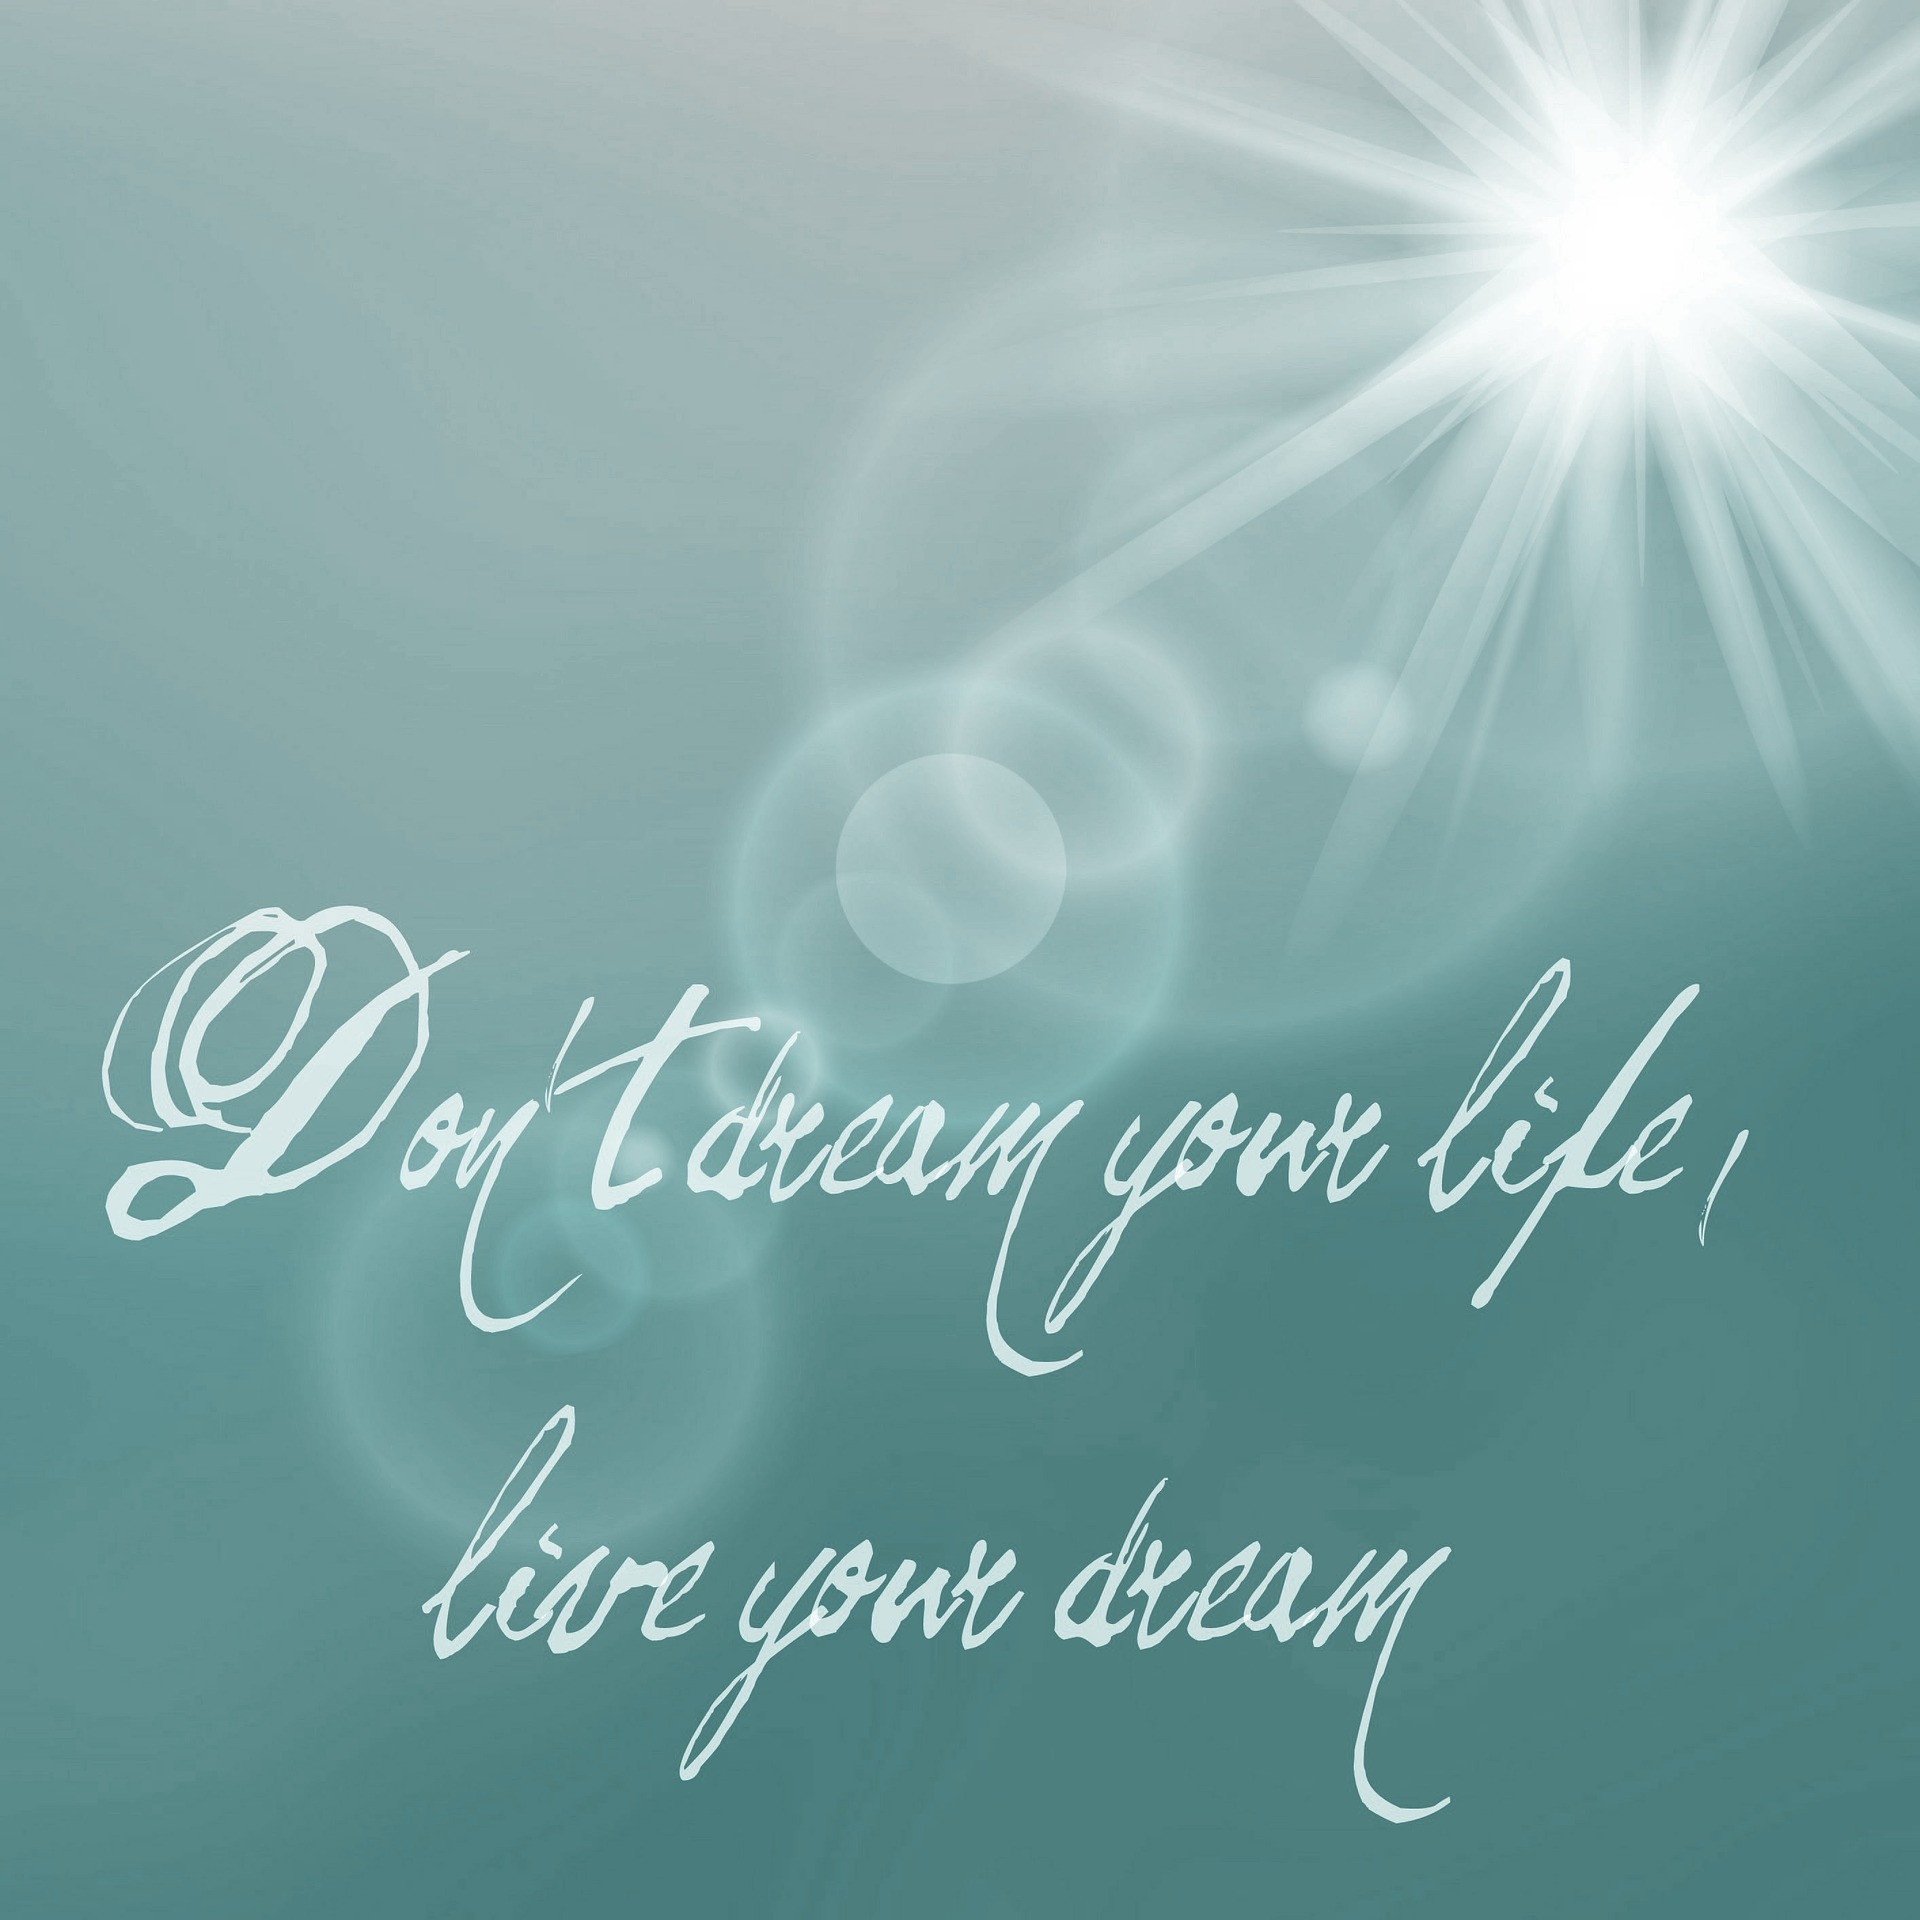 Don’t Just Dream It – Do It! Guest Post By Bianca Bujan @bitsofbee